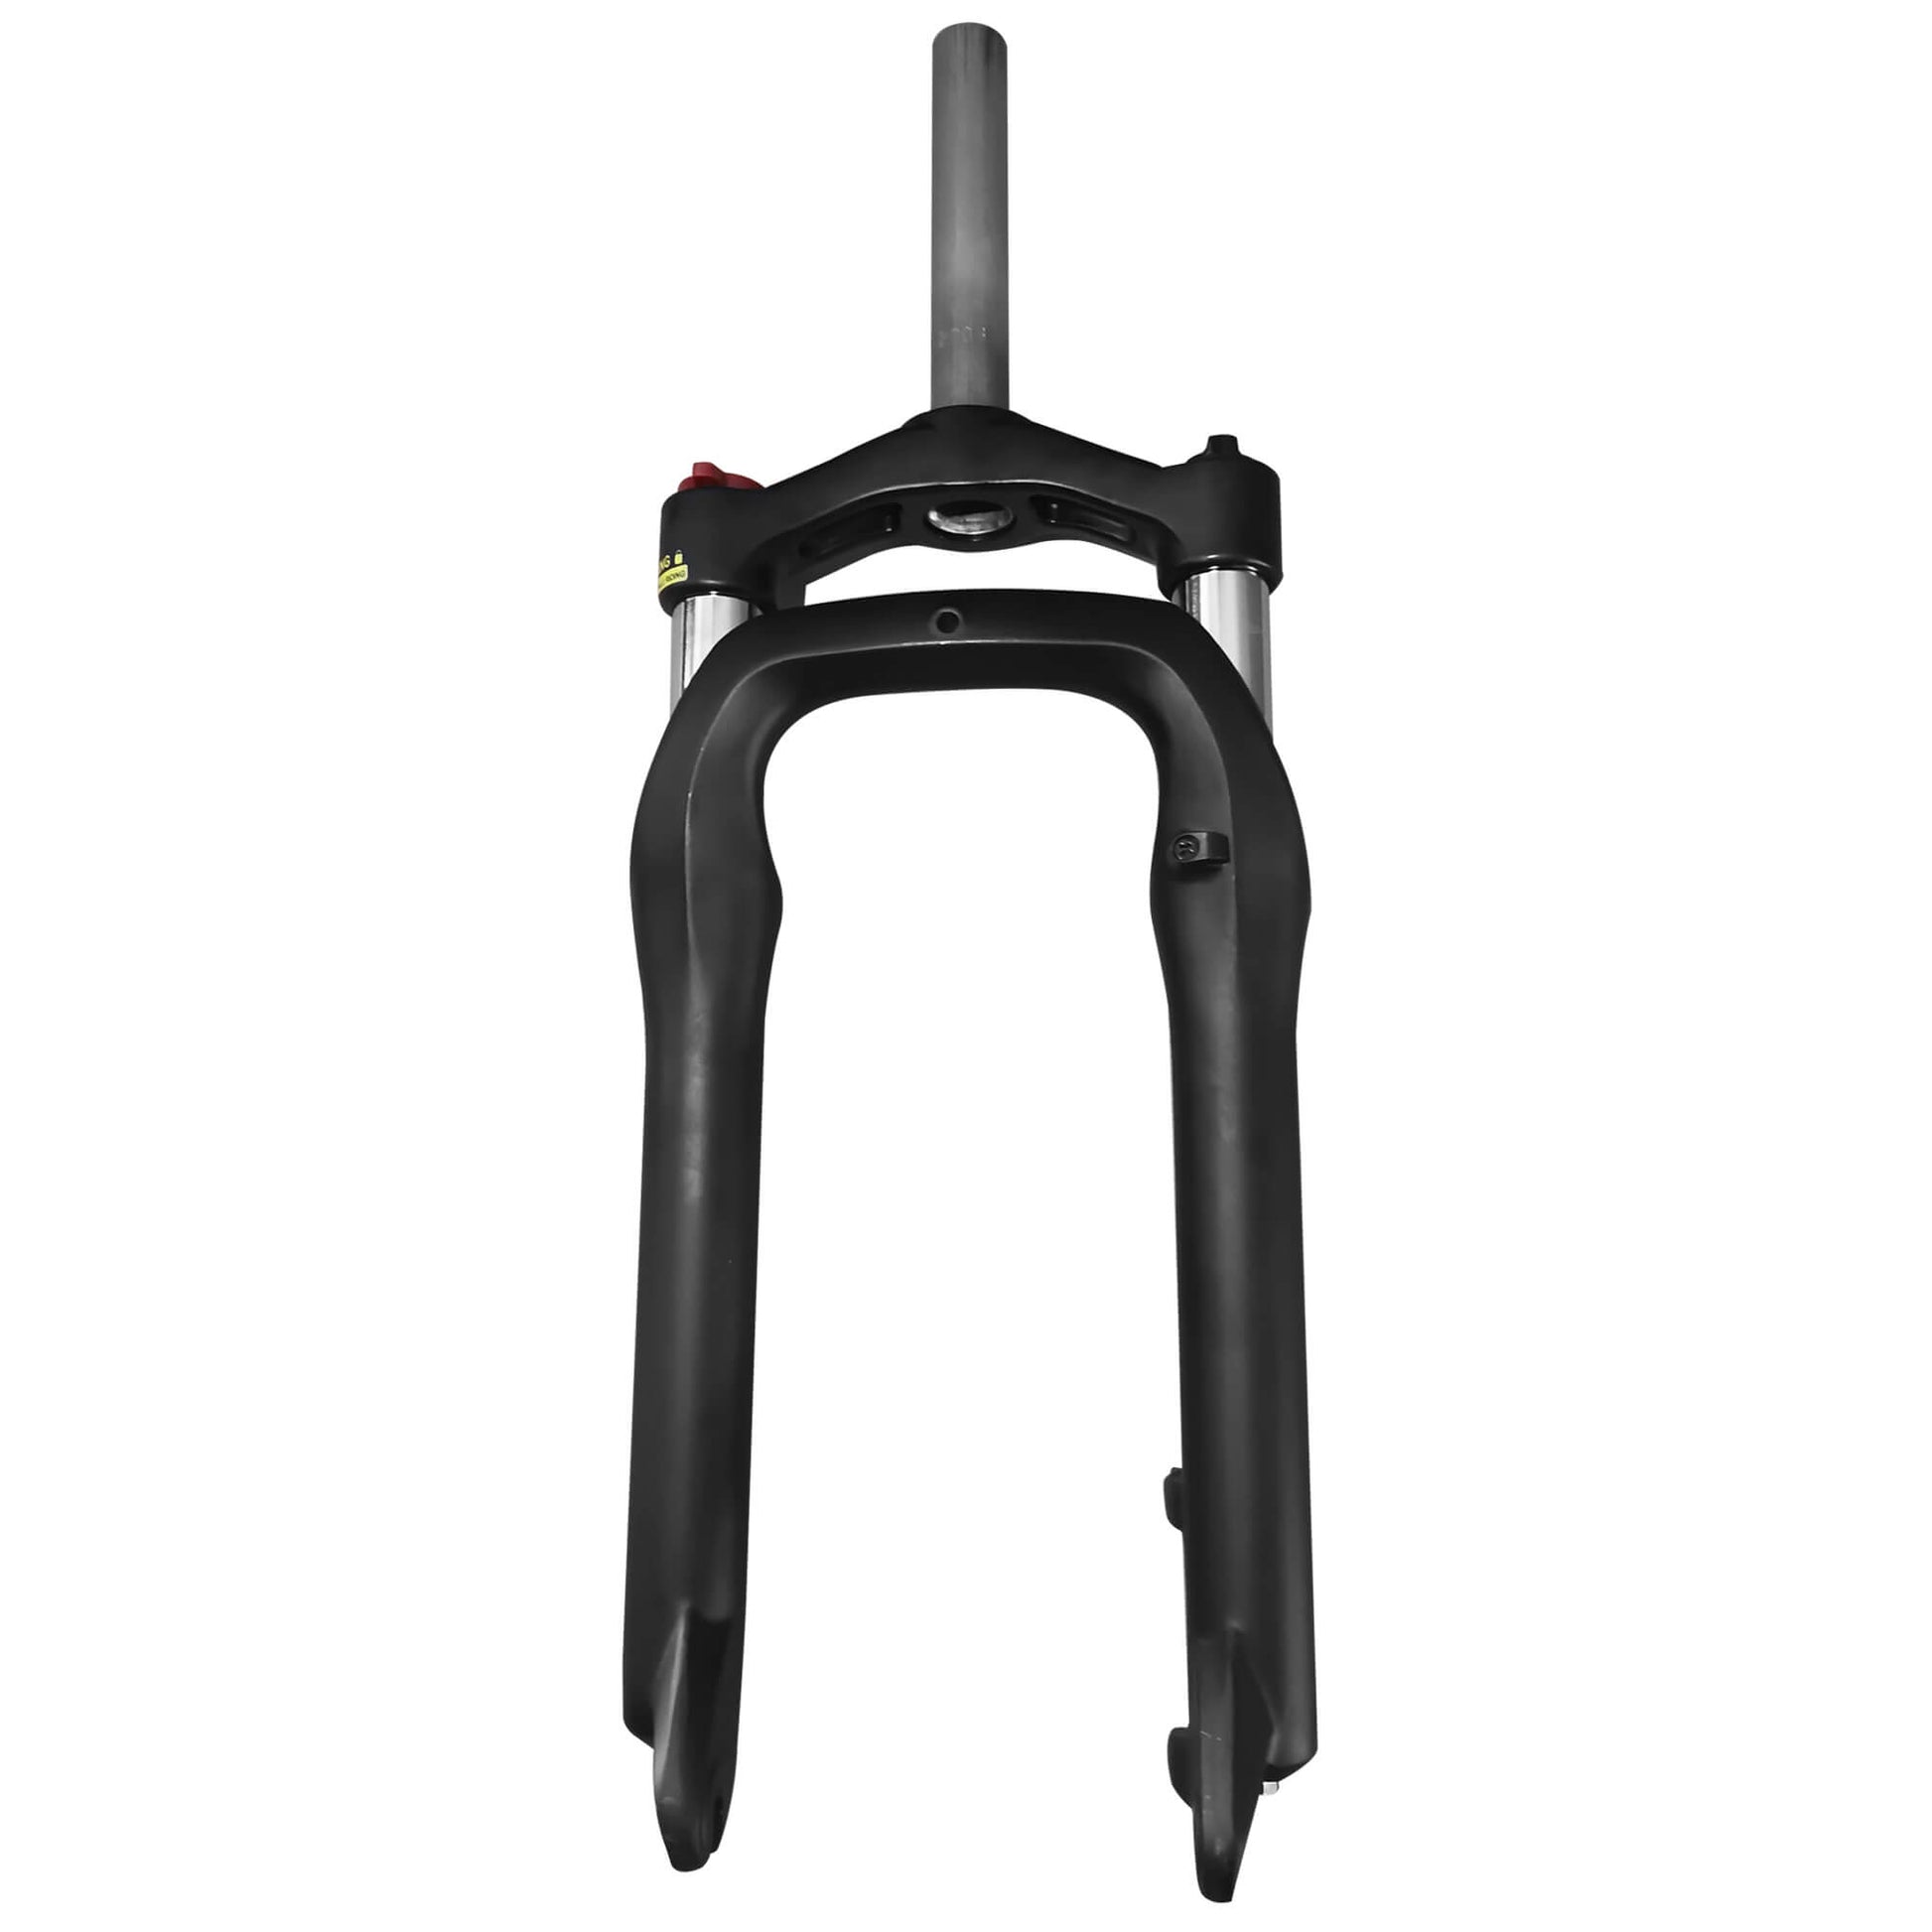 Suspension front Fork for 20 Inches folding fat bikes - 1